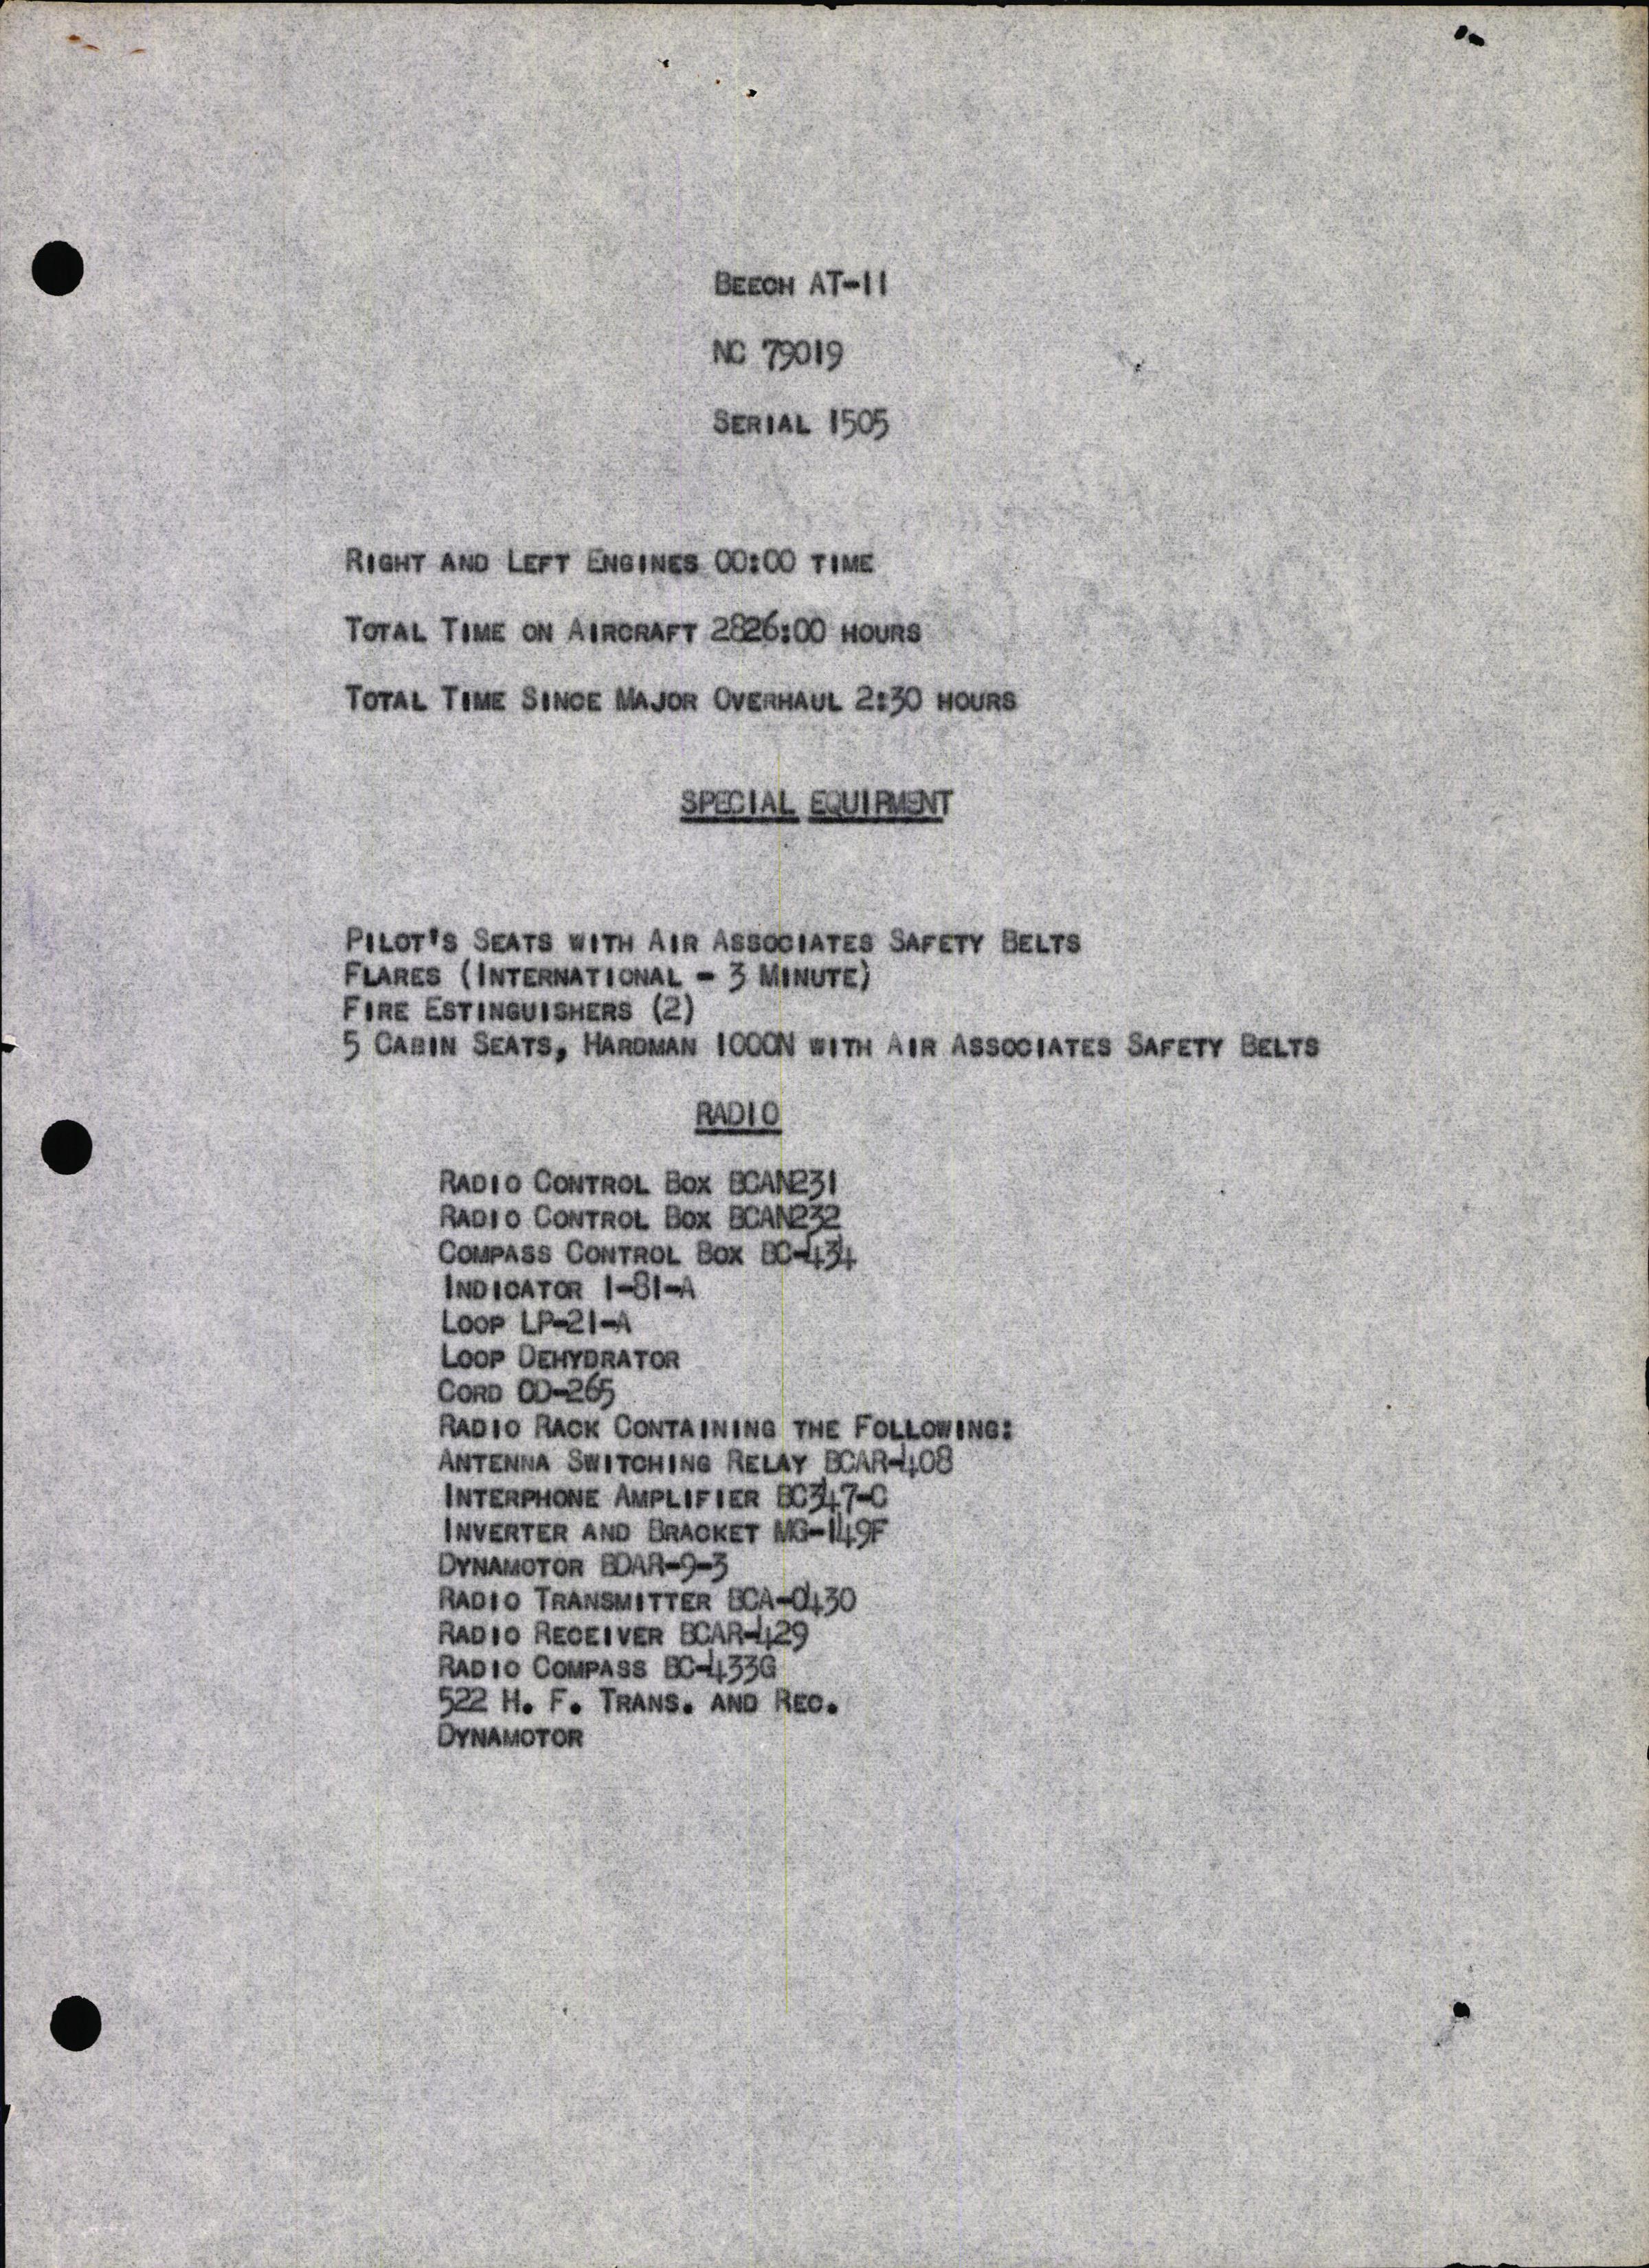 Sample page 7 from AirCorps Library document: Technical Information for Serial Number 1505